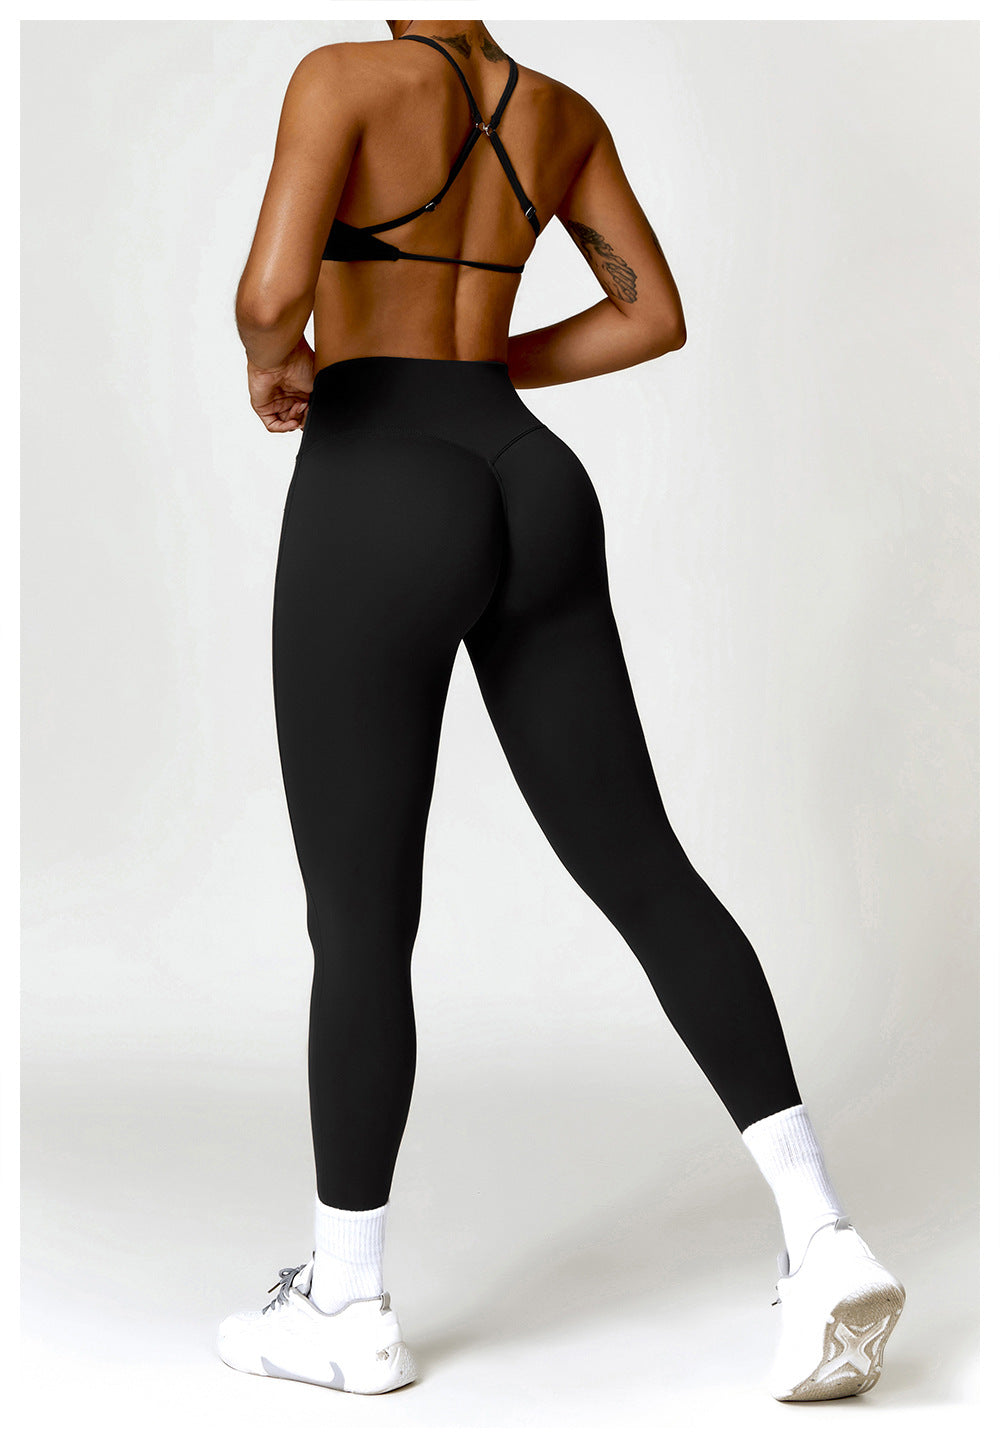 Quick Dry Cropped Bra and Legging